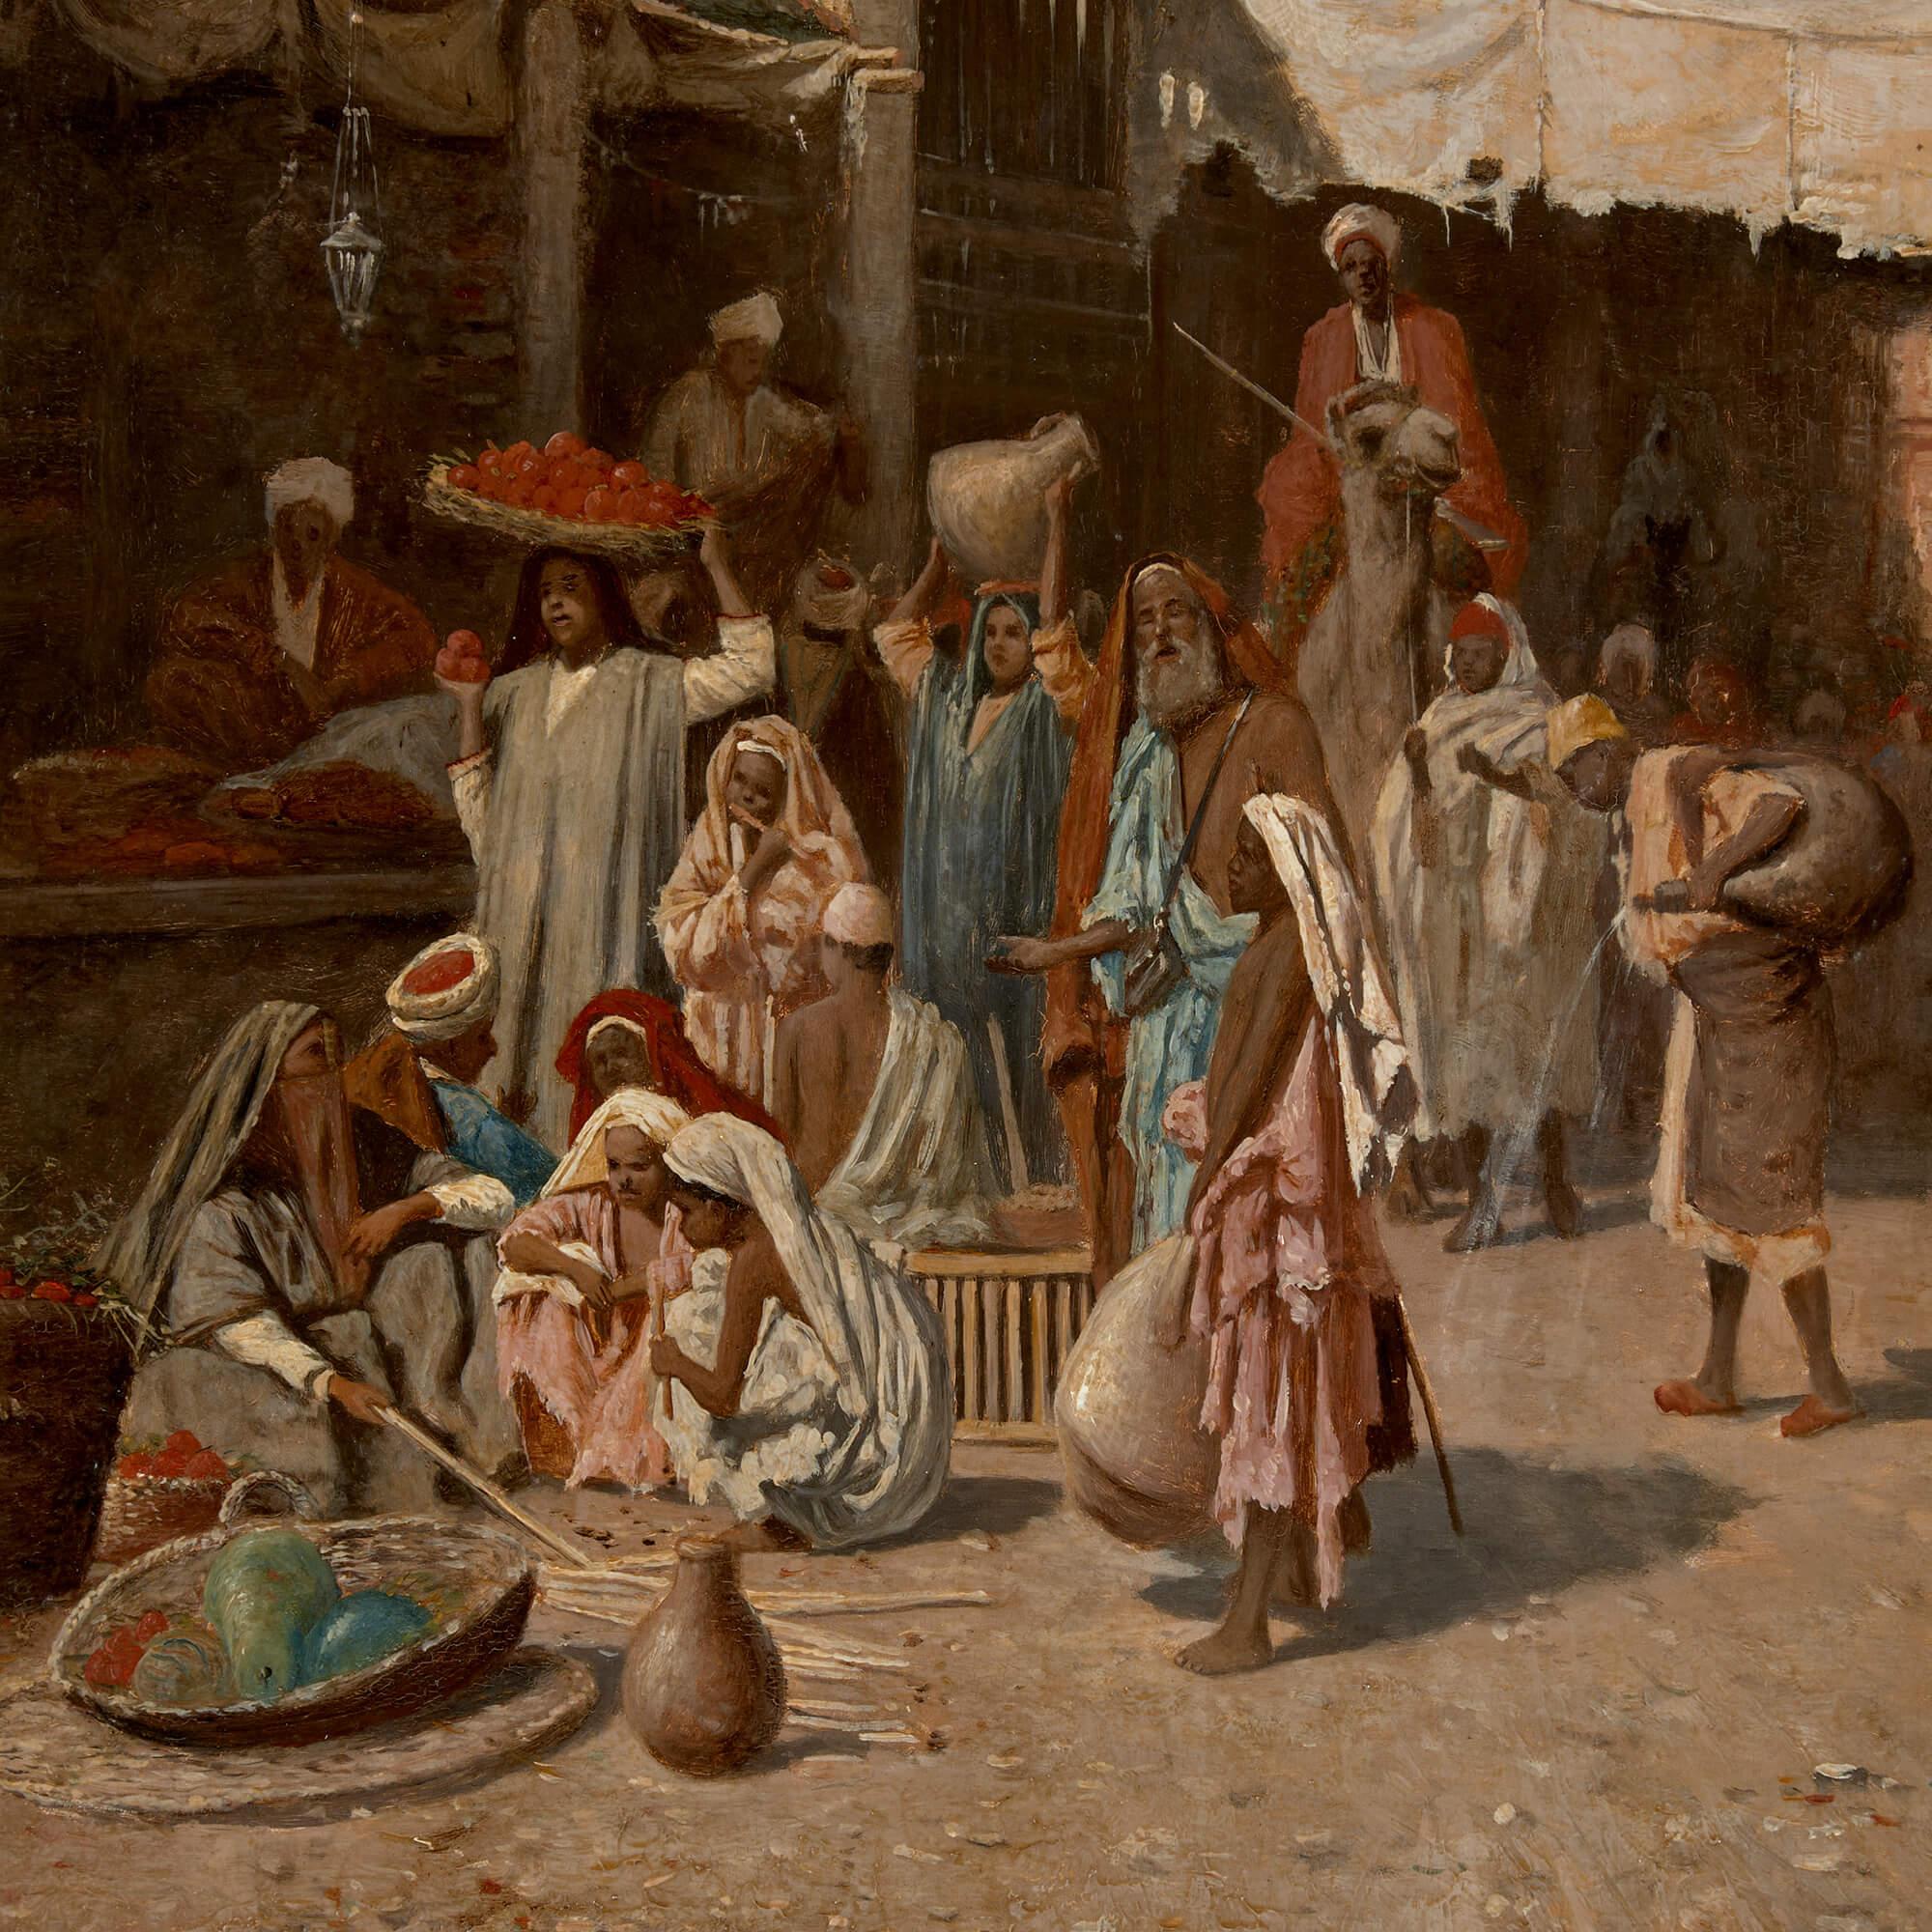 Orientalist oil painting of a market scene by Bernard 
Continental, Late 19th Century 
Panel: Height 53cm, width 41cm
Frame: Height 70cm, width 58cm, depth 6cm

This oil on panel by L. Bernard from the late 19th century depicts an Orientalist market